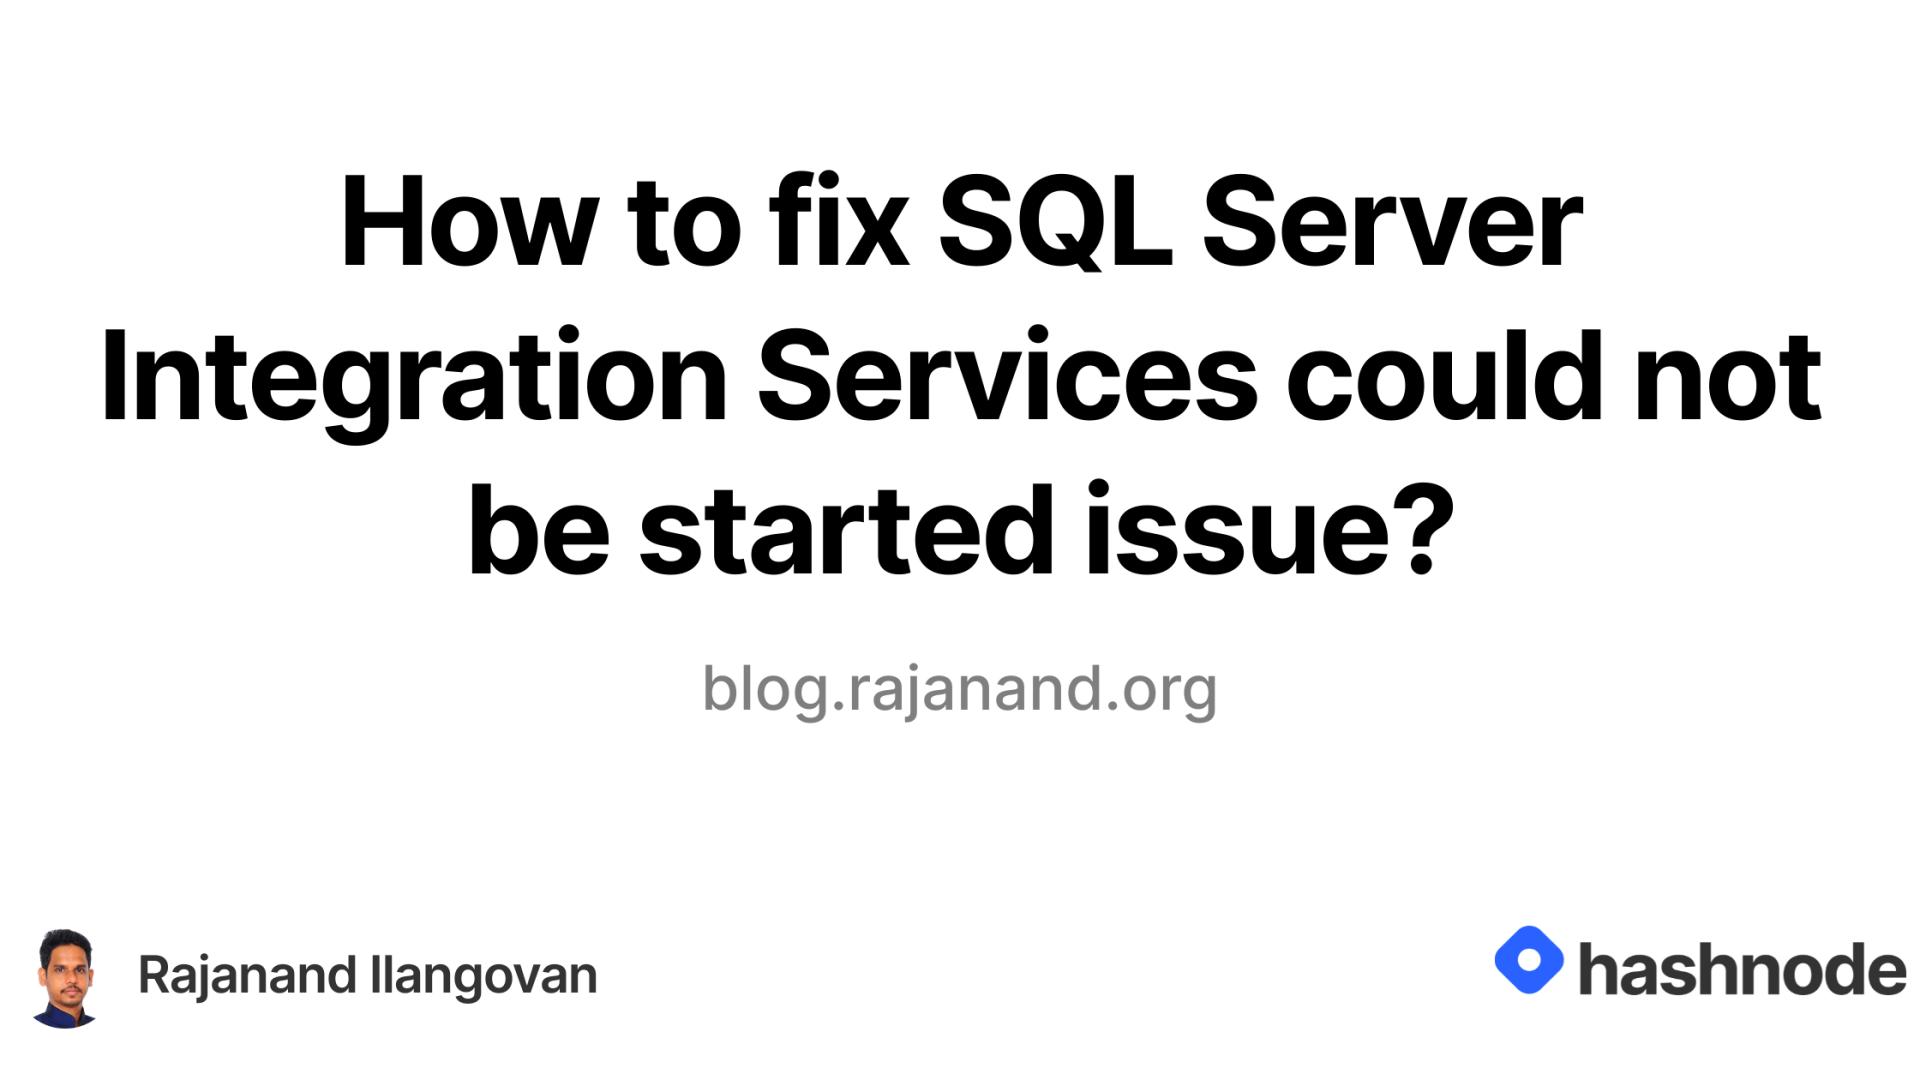 How to fix SQL Server Integration Services could not be started issue?